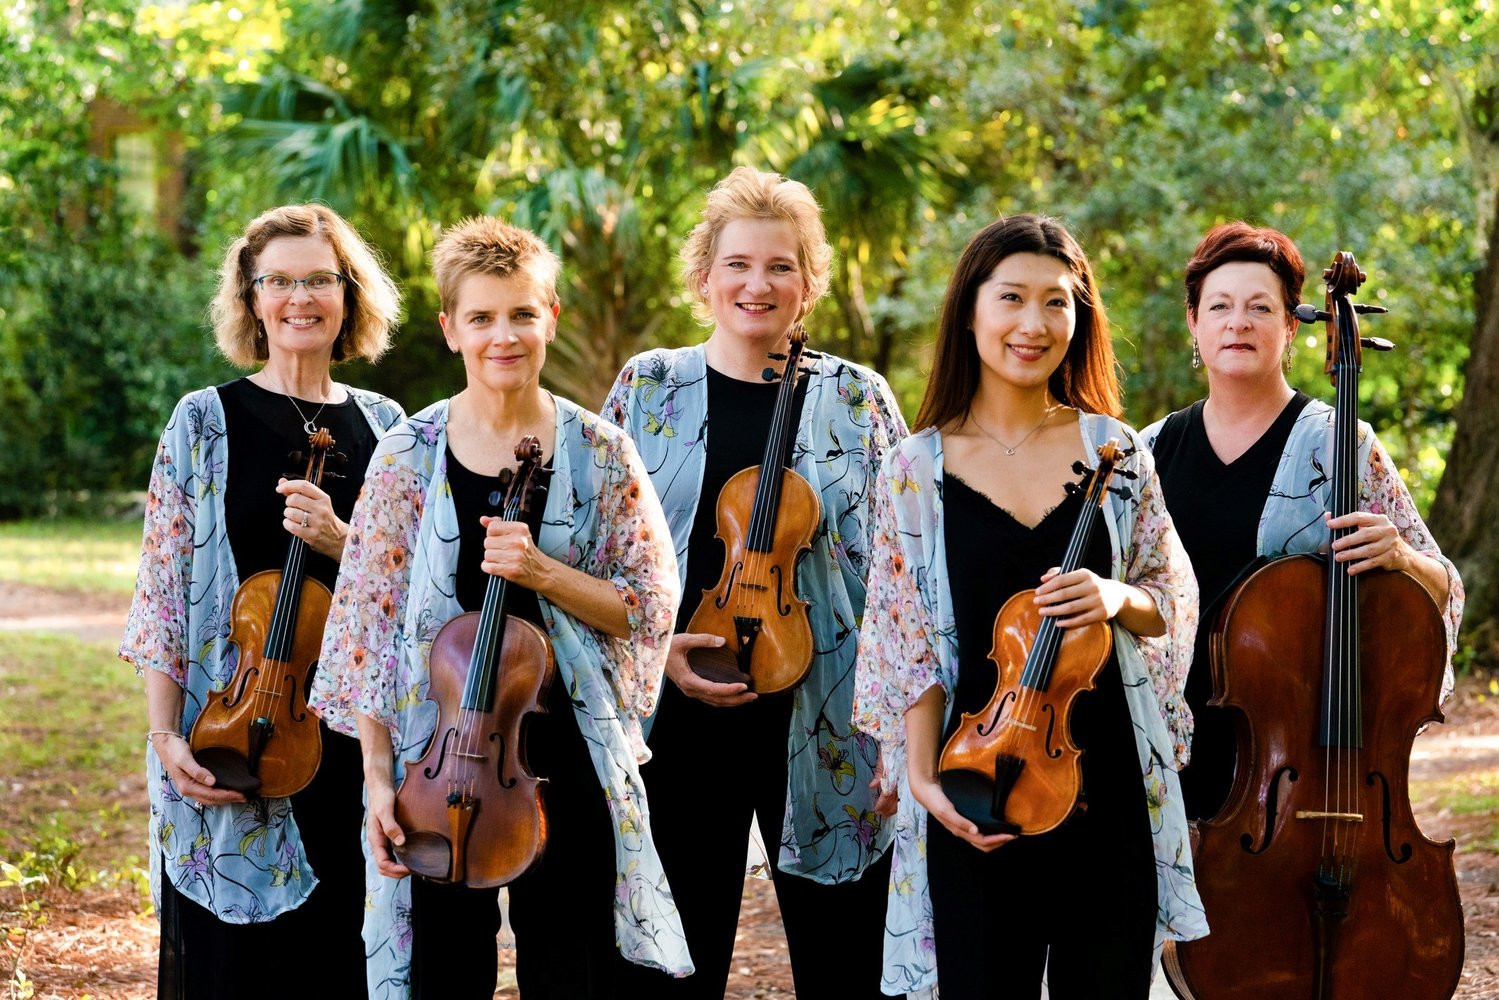 Florida Chamber Music Project, from left: Ann Hertler, Susan Pardue, Patrice Evans, Siyu Zhang and Laurie Casseday